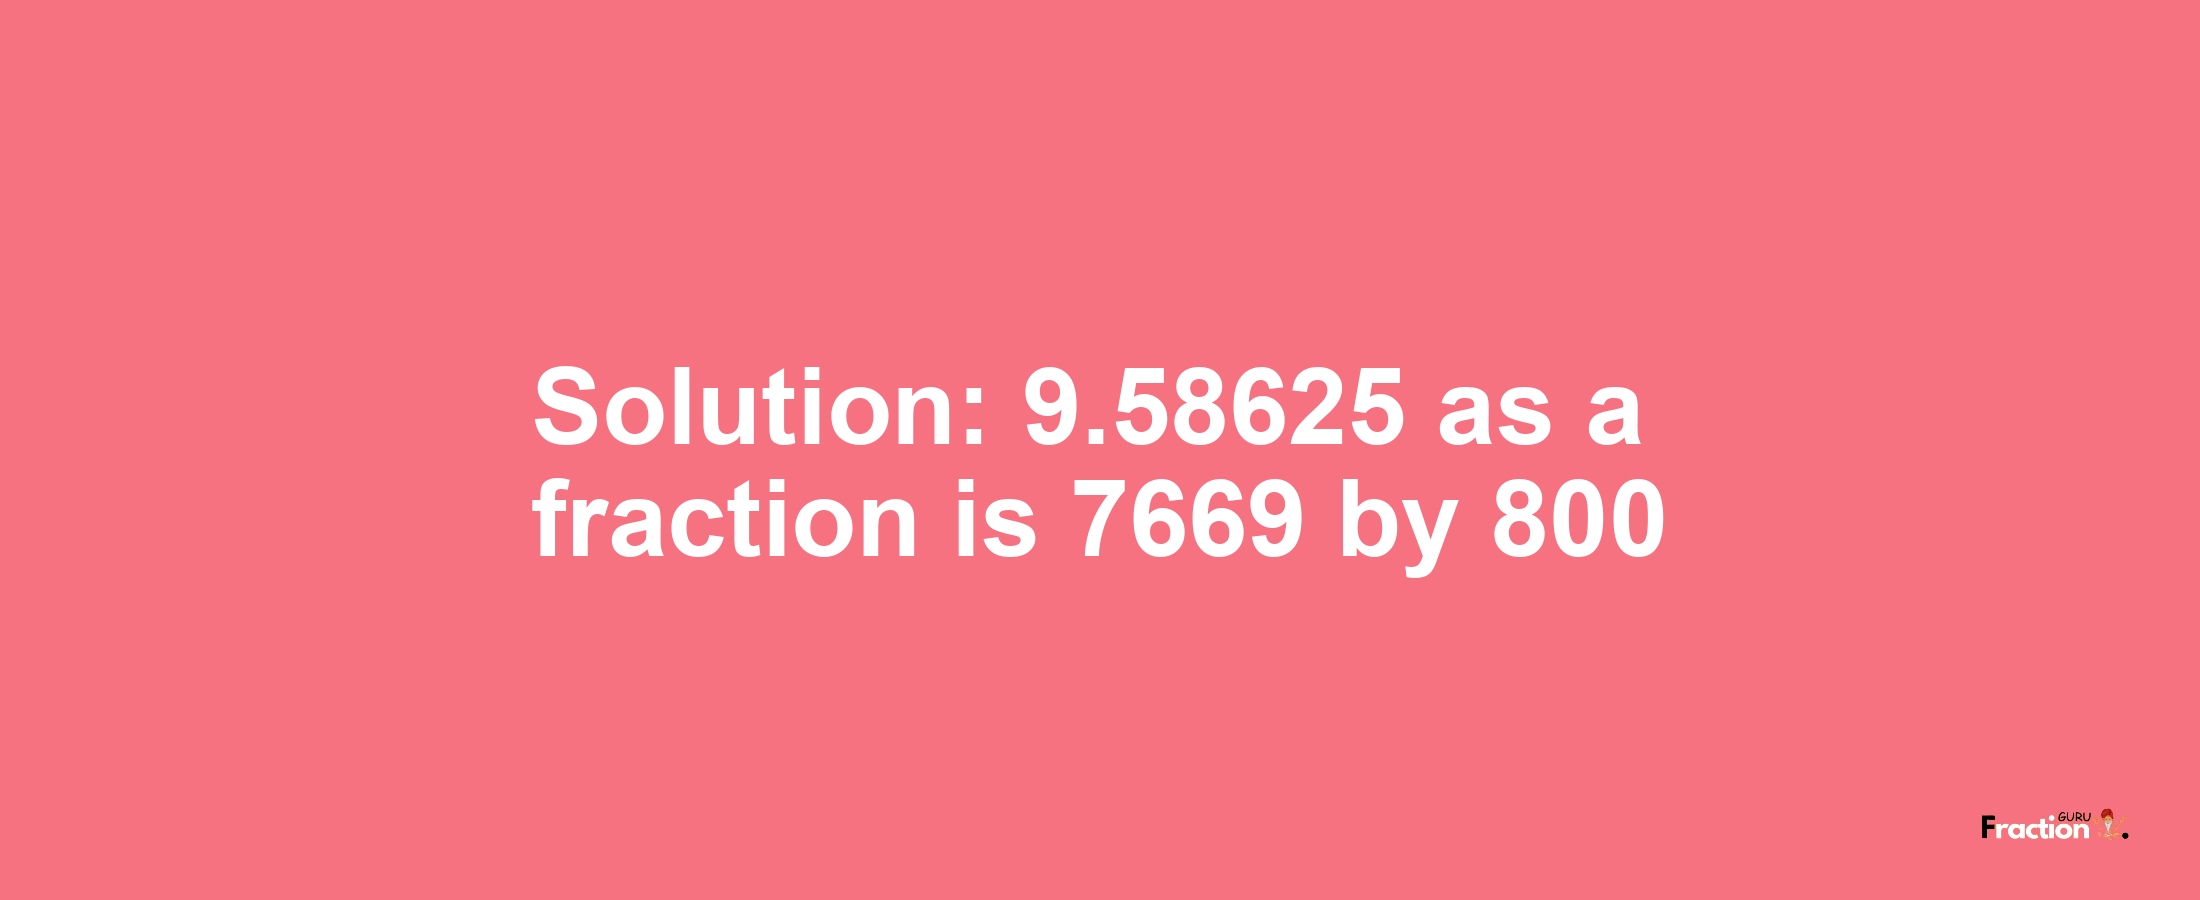 Solution:9.58625 as a fraction is 7669/800